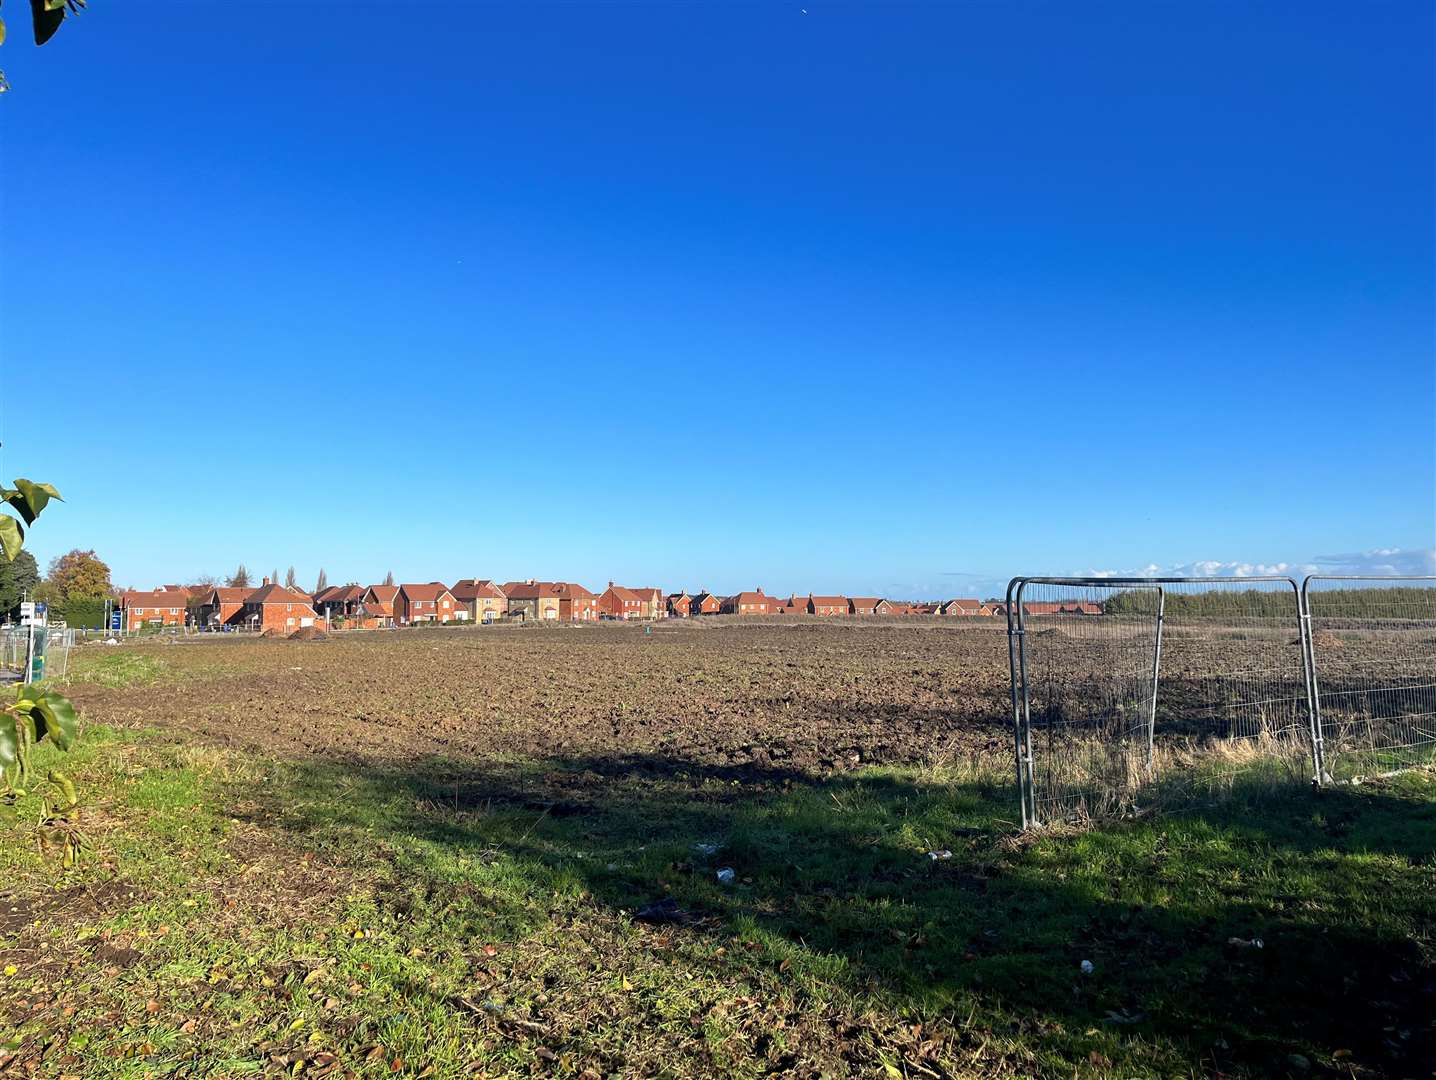 The land in Love Lane, Faversham where plans have been pitched for a 67-bed care home